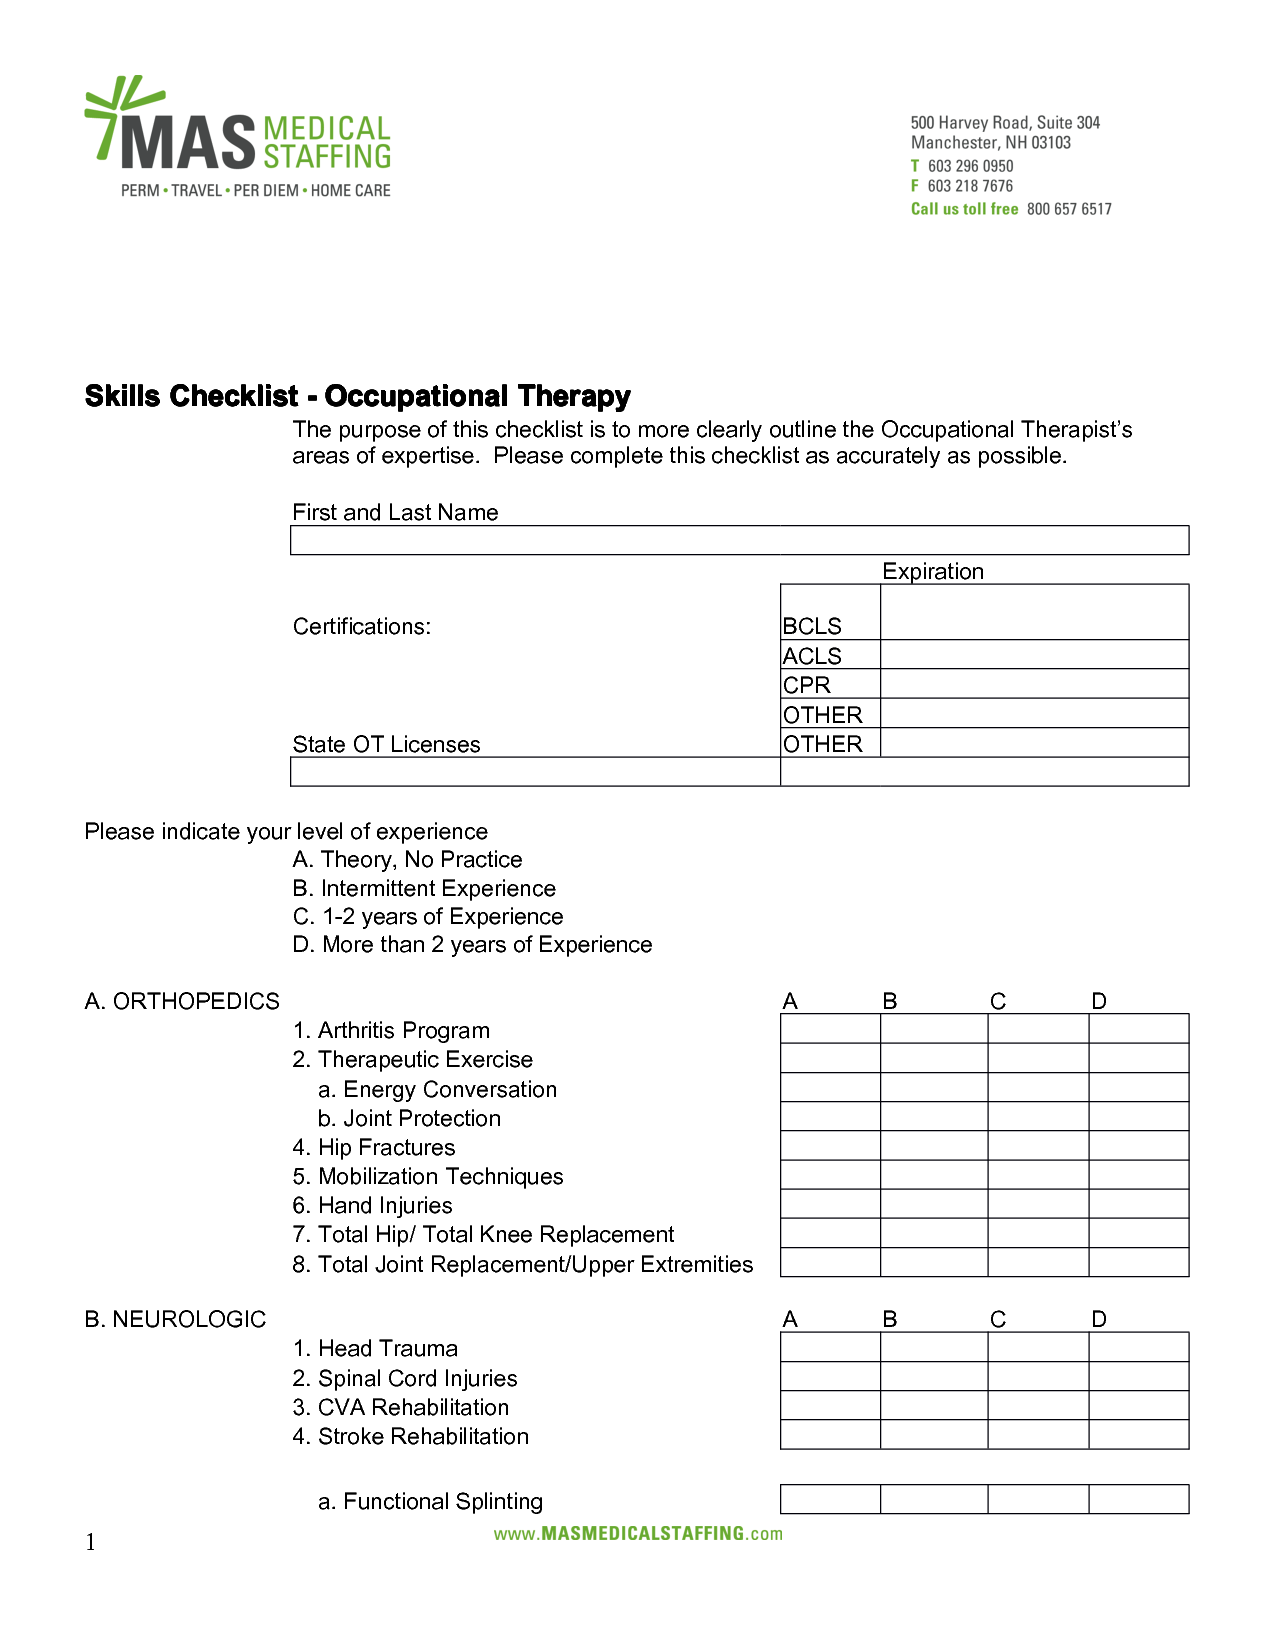 Occupational Therapy Home Evaluation Checklist Image